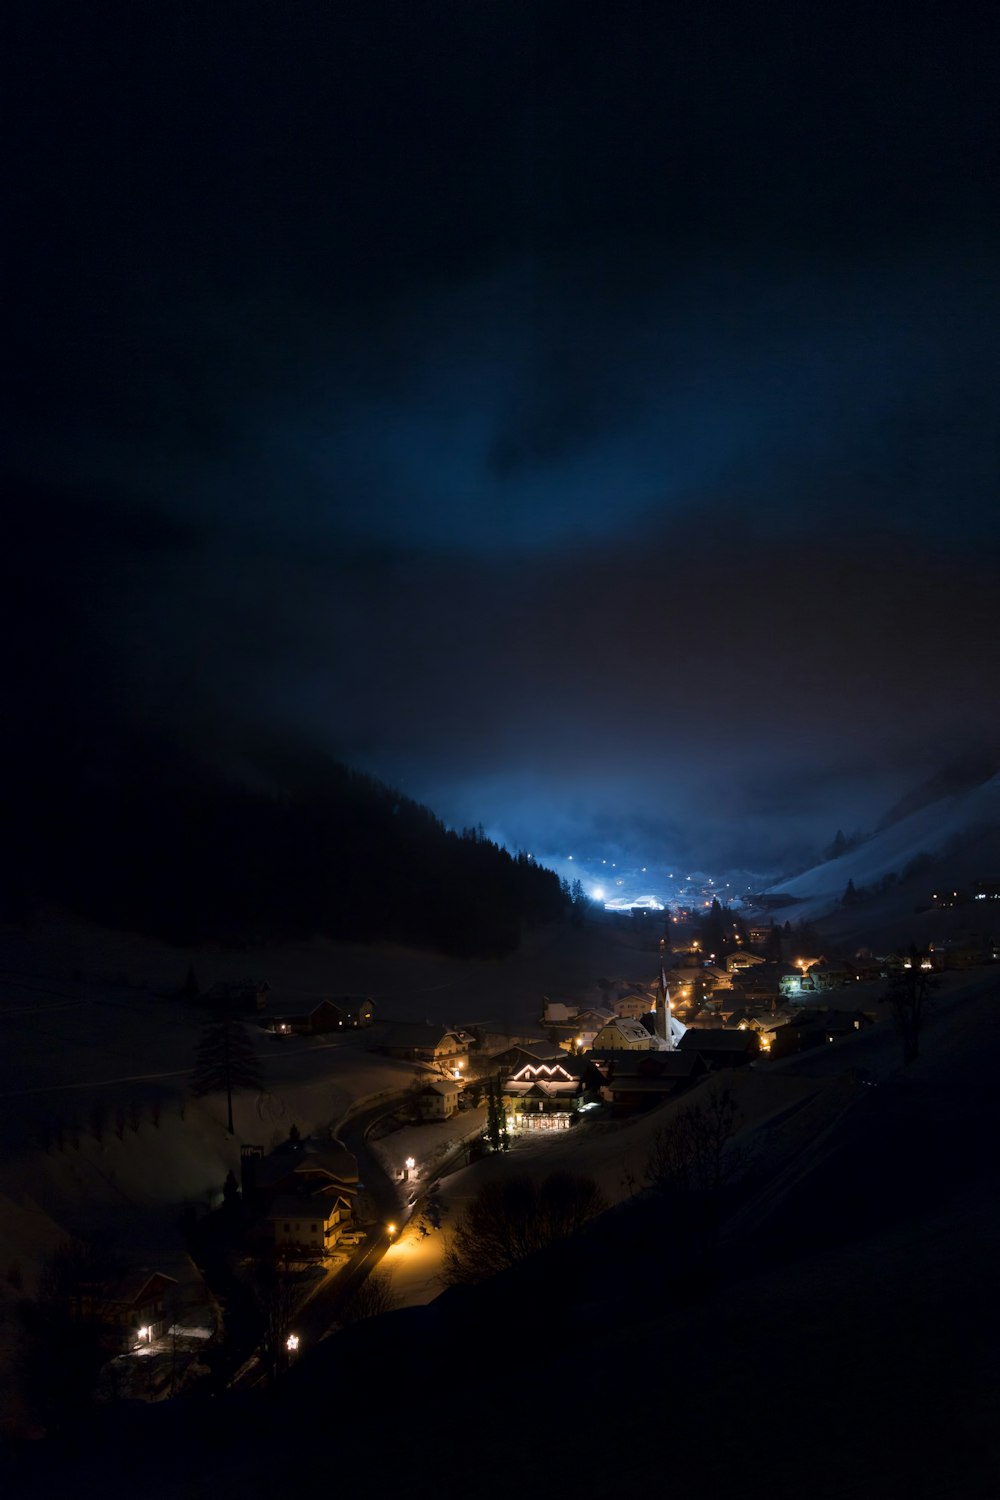 a night time view of a town in the mountains